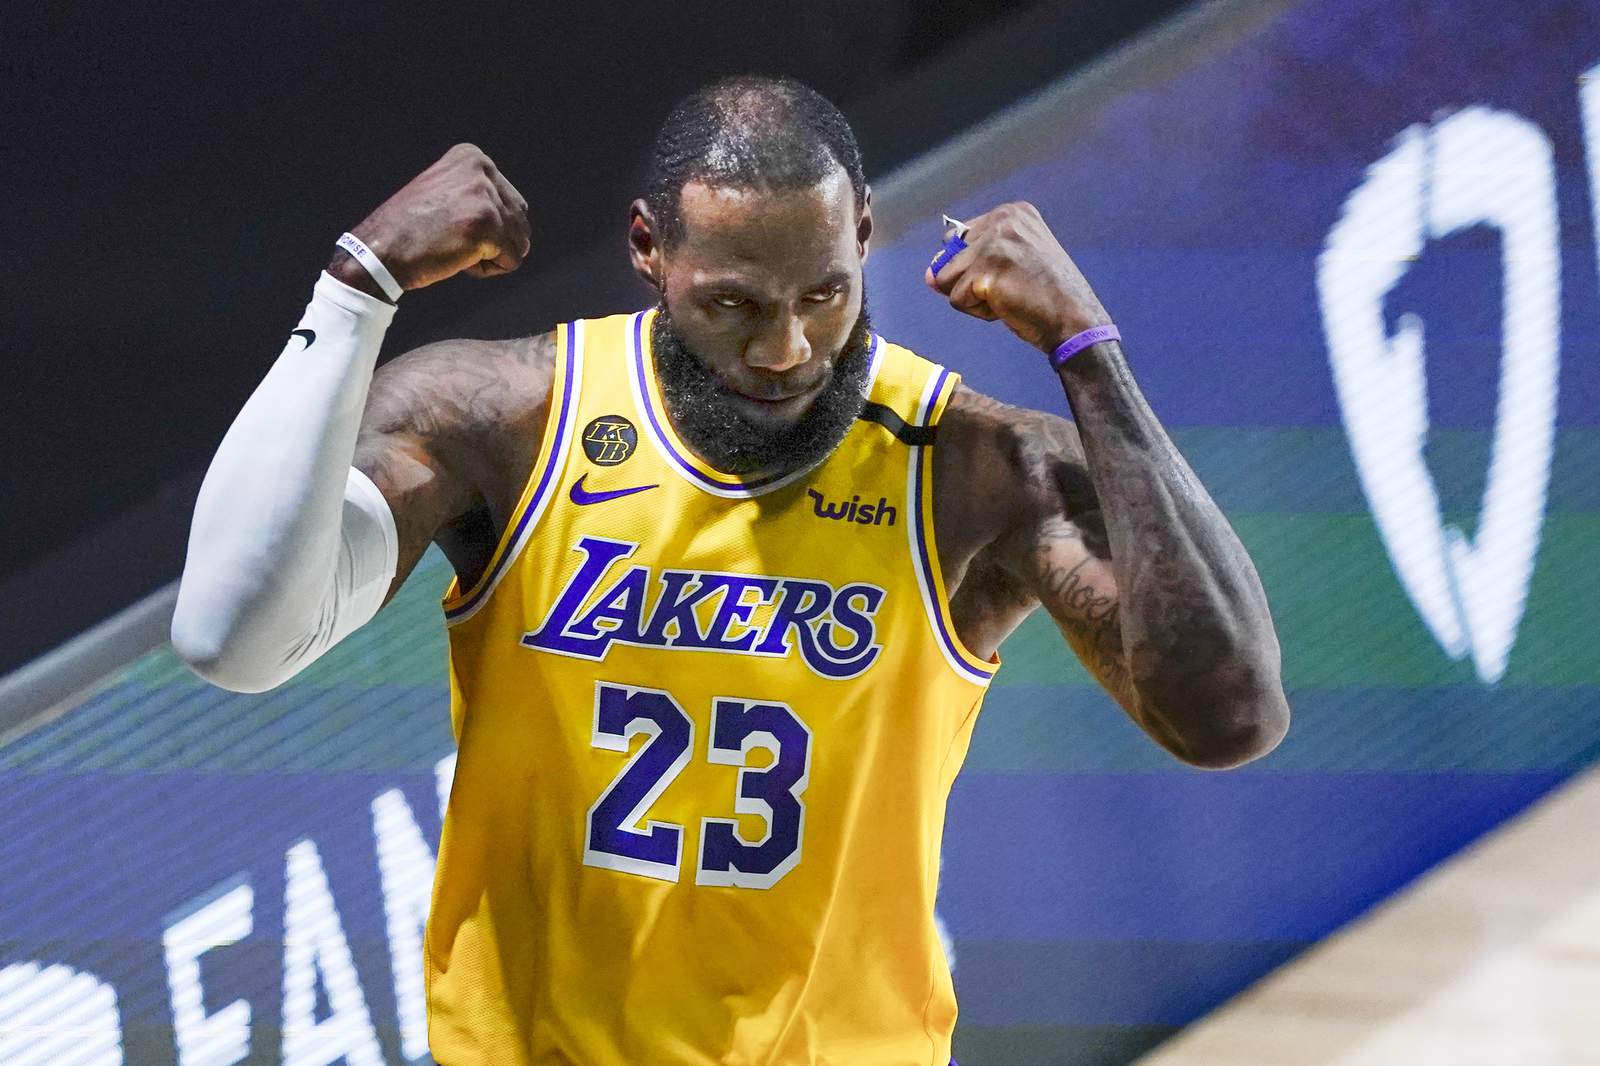 James and Lakers advance with 131-122 win over Trail Blazers